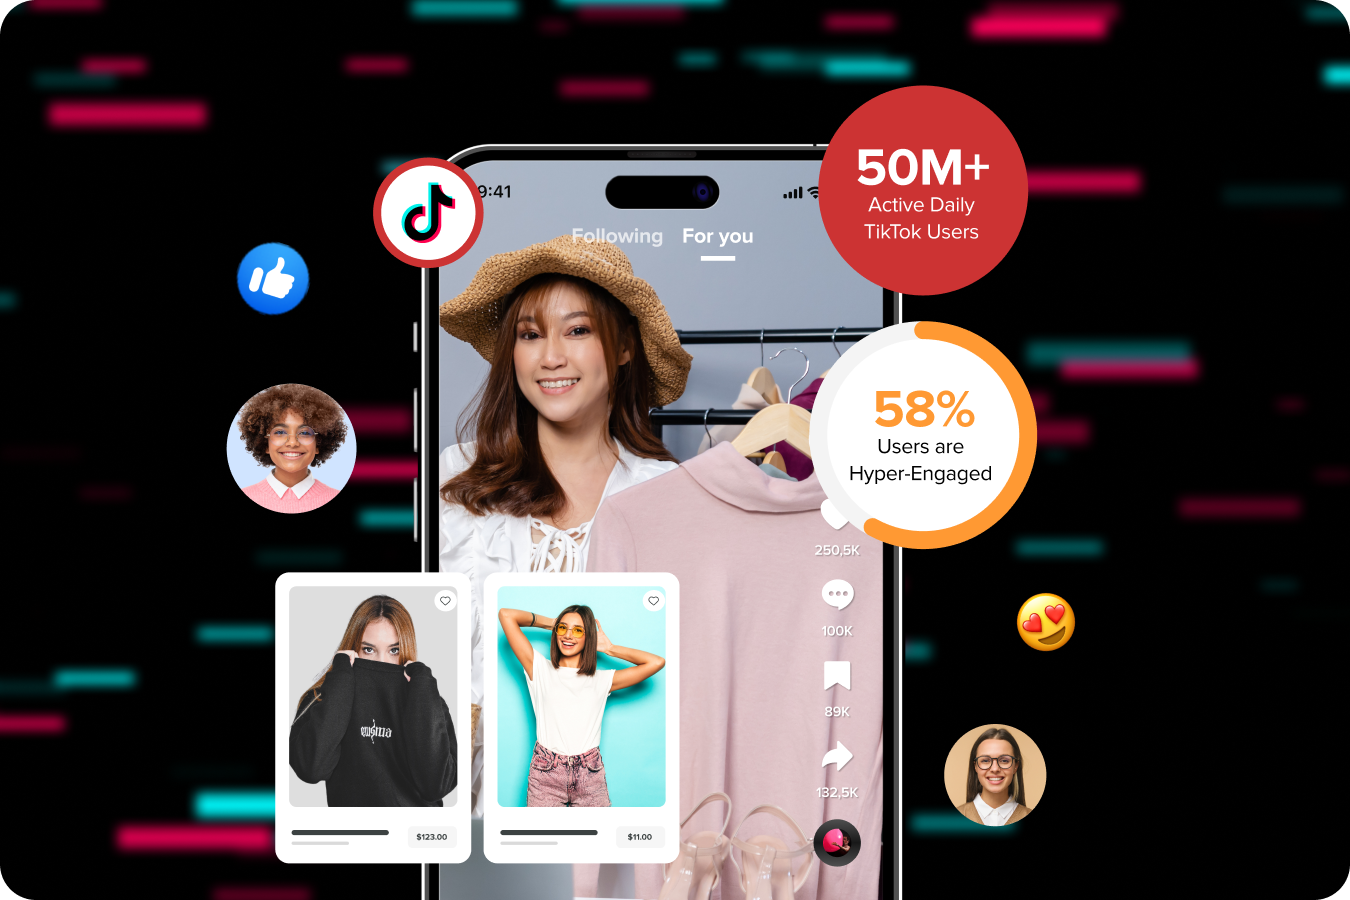 An infographic with TikTok user engagement stats, profile icons, fashion posts, and reaction emojis on a dynamic background.